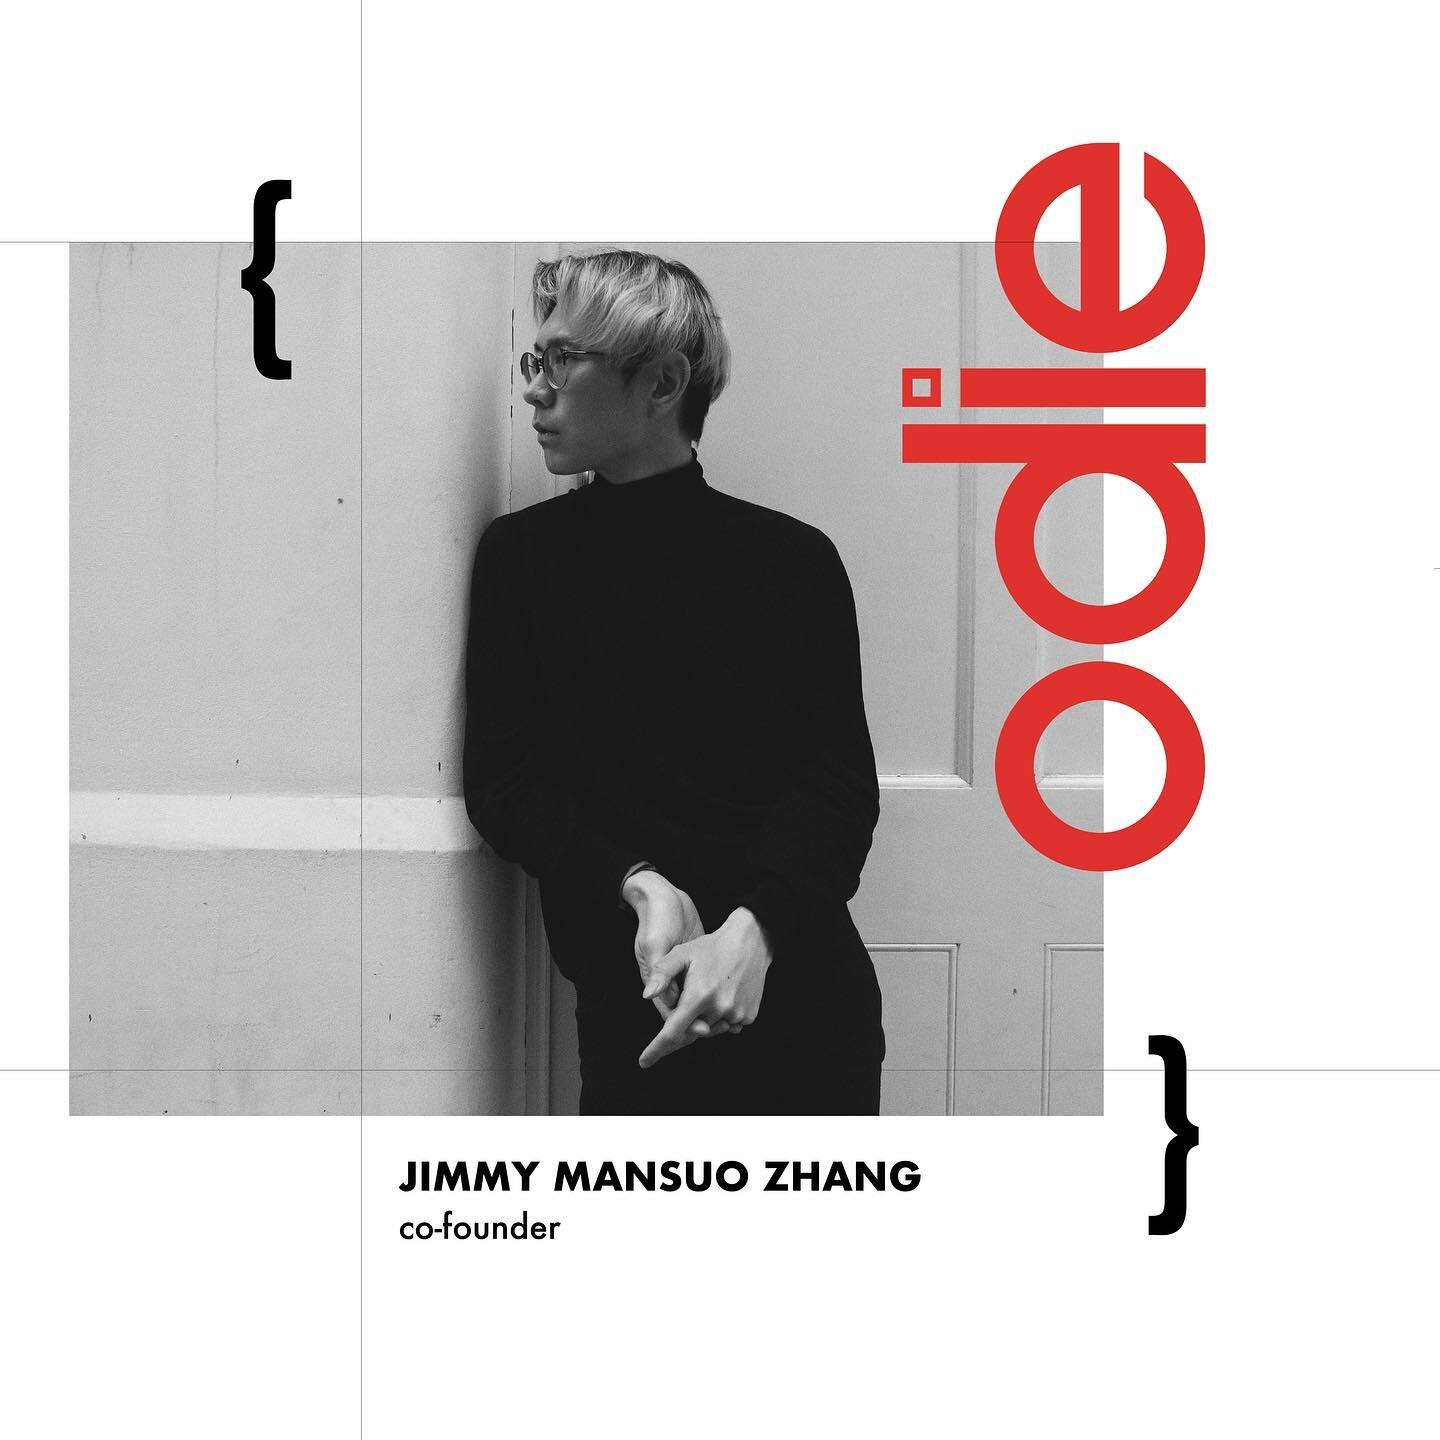 Jimmy Mansuo Zhang, co-founder of Odie, talks about design, his inspiration and passion. As a digital designer / digital animator, Jimmy&rsquo;s creative ability comes self-exploration and experimental practices through both art and design, focusing 